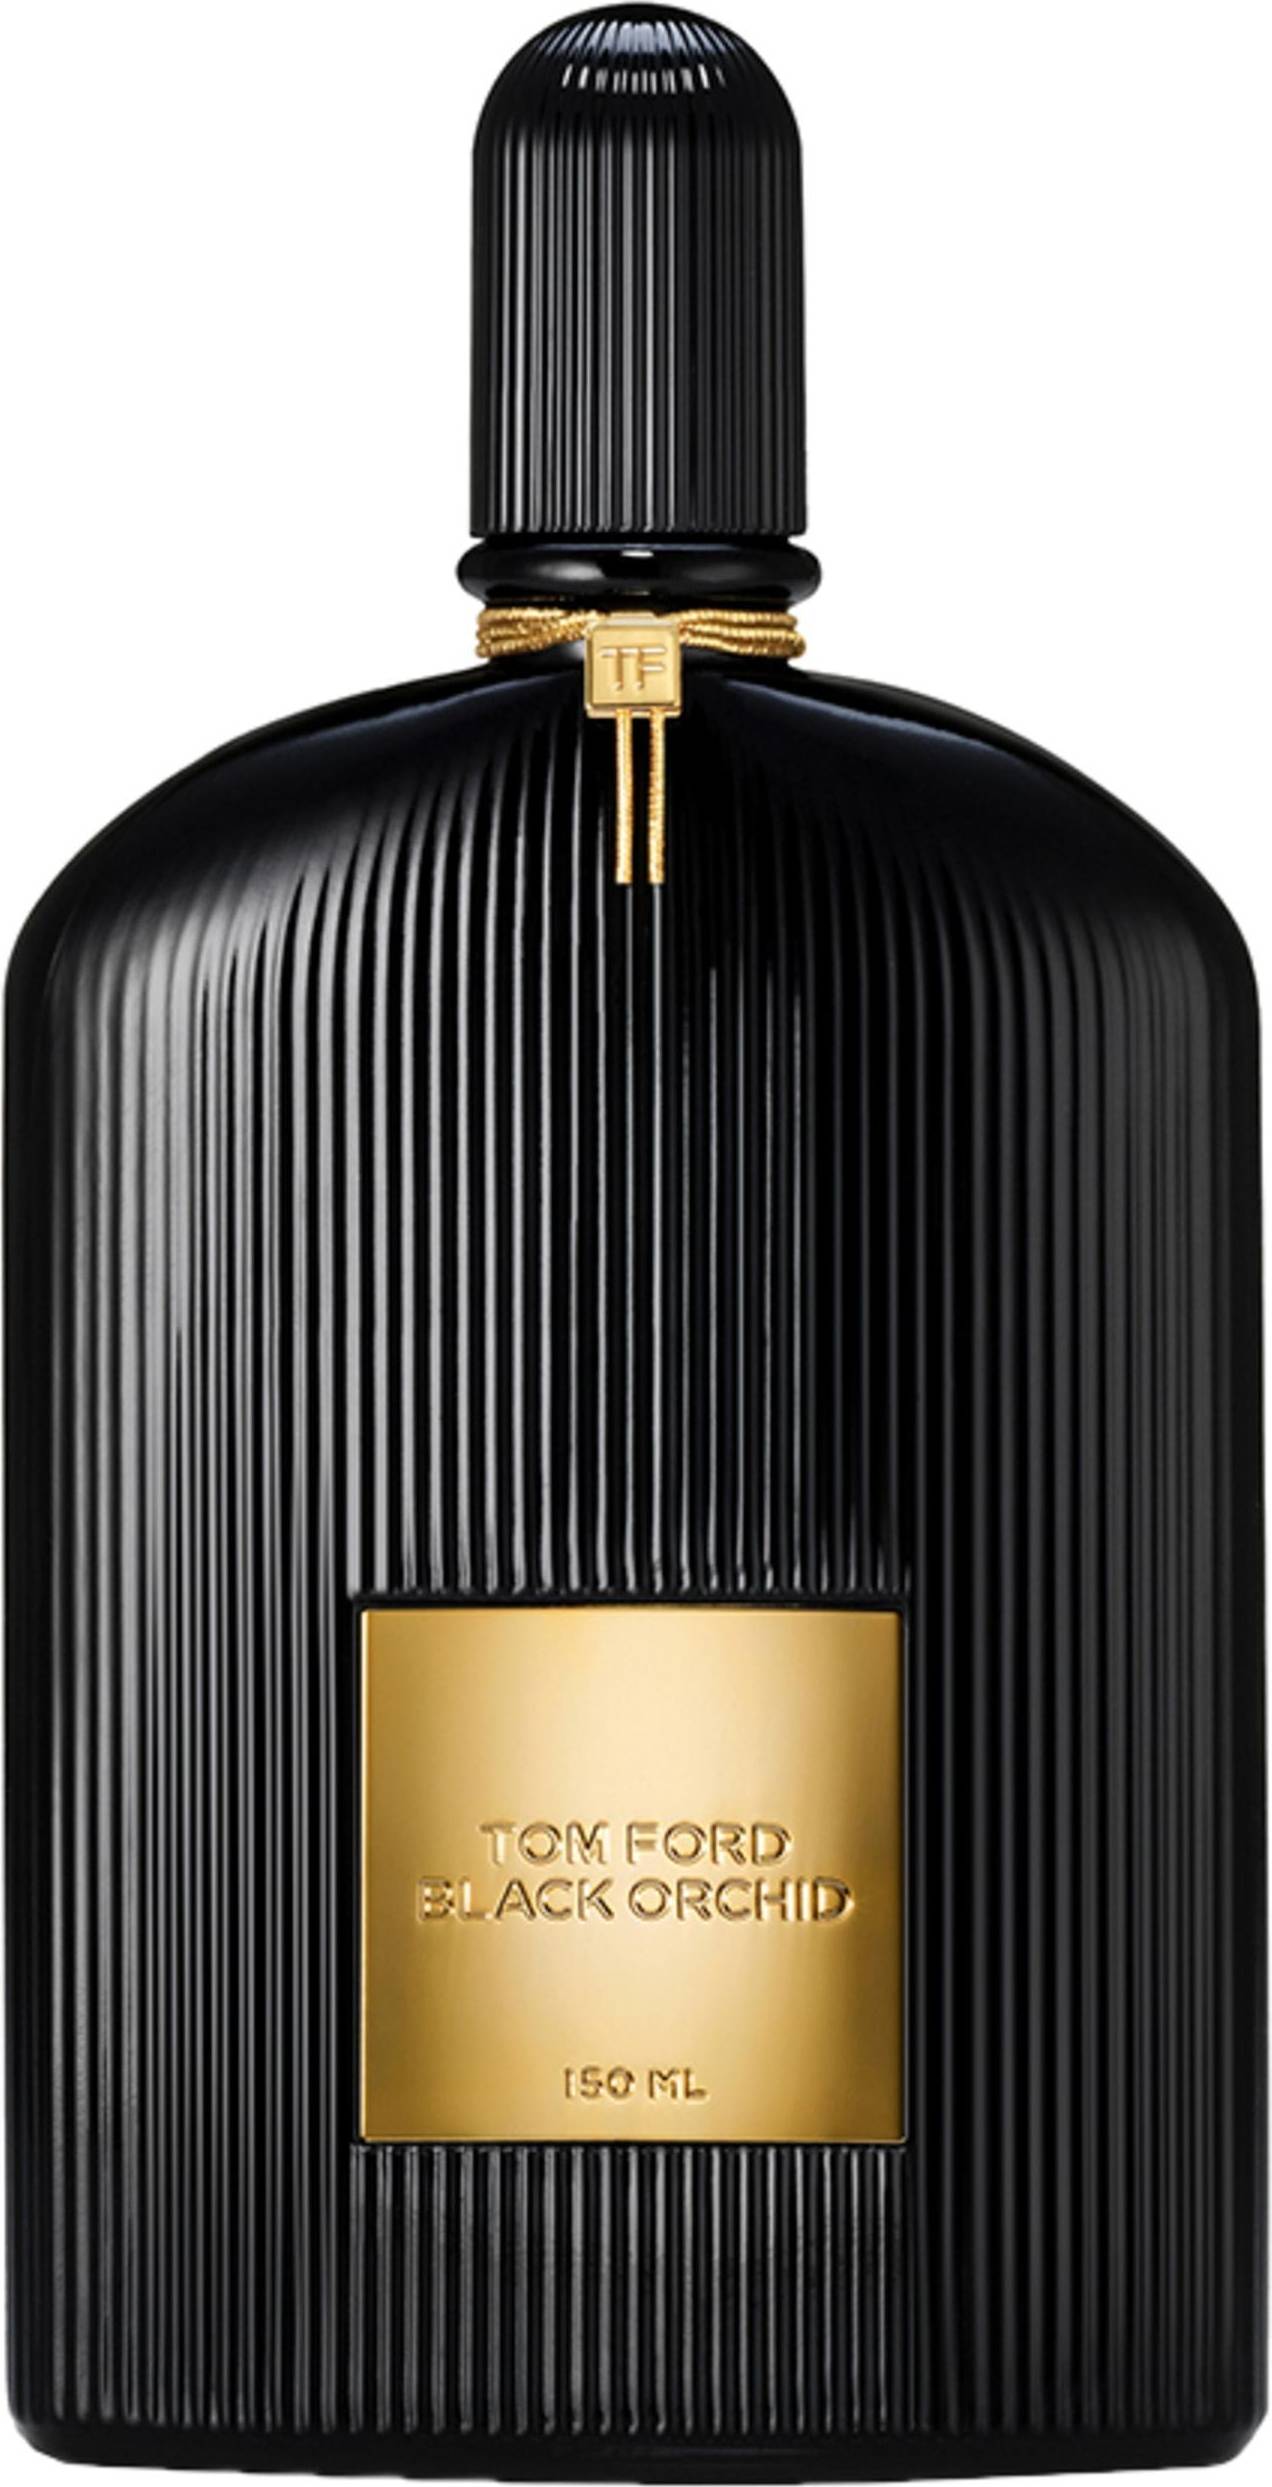 Tom ford black orchid parfum • Compare best prices